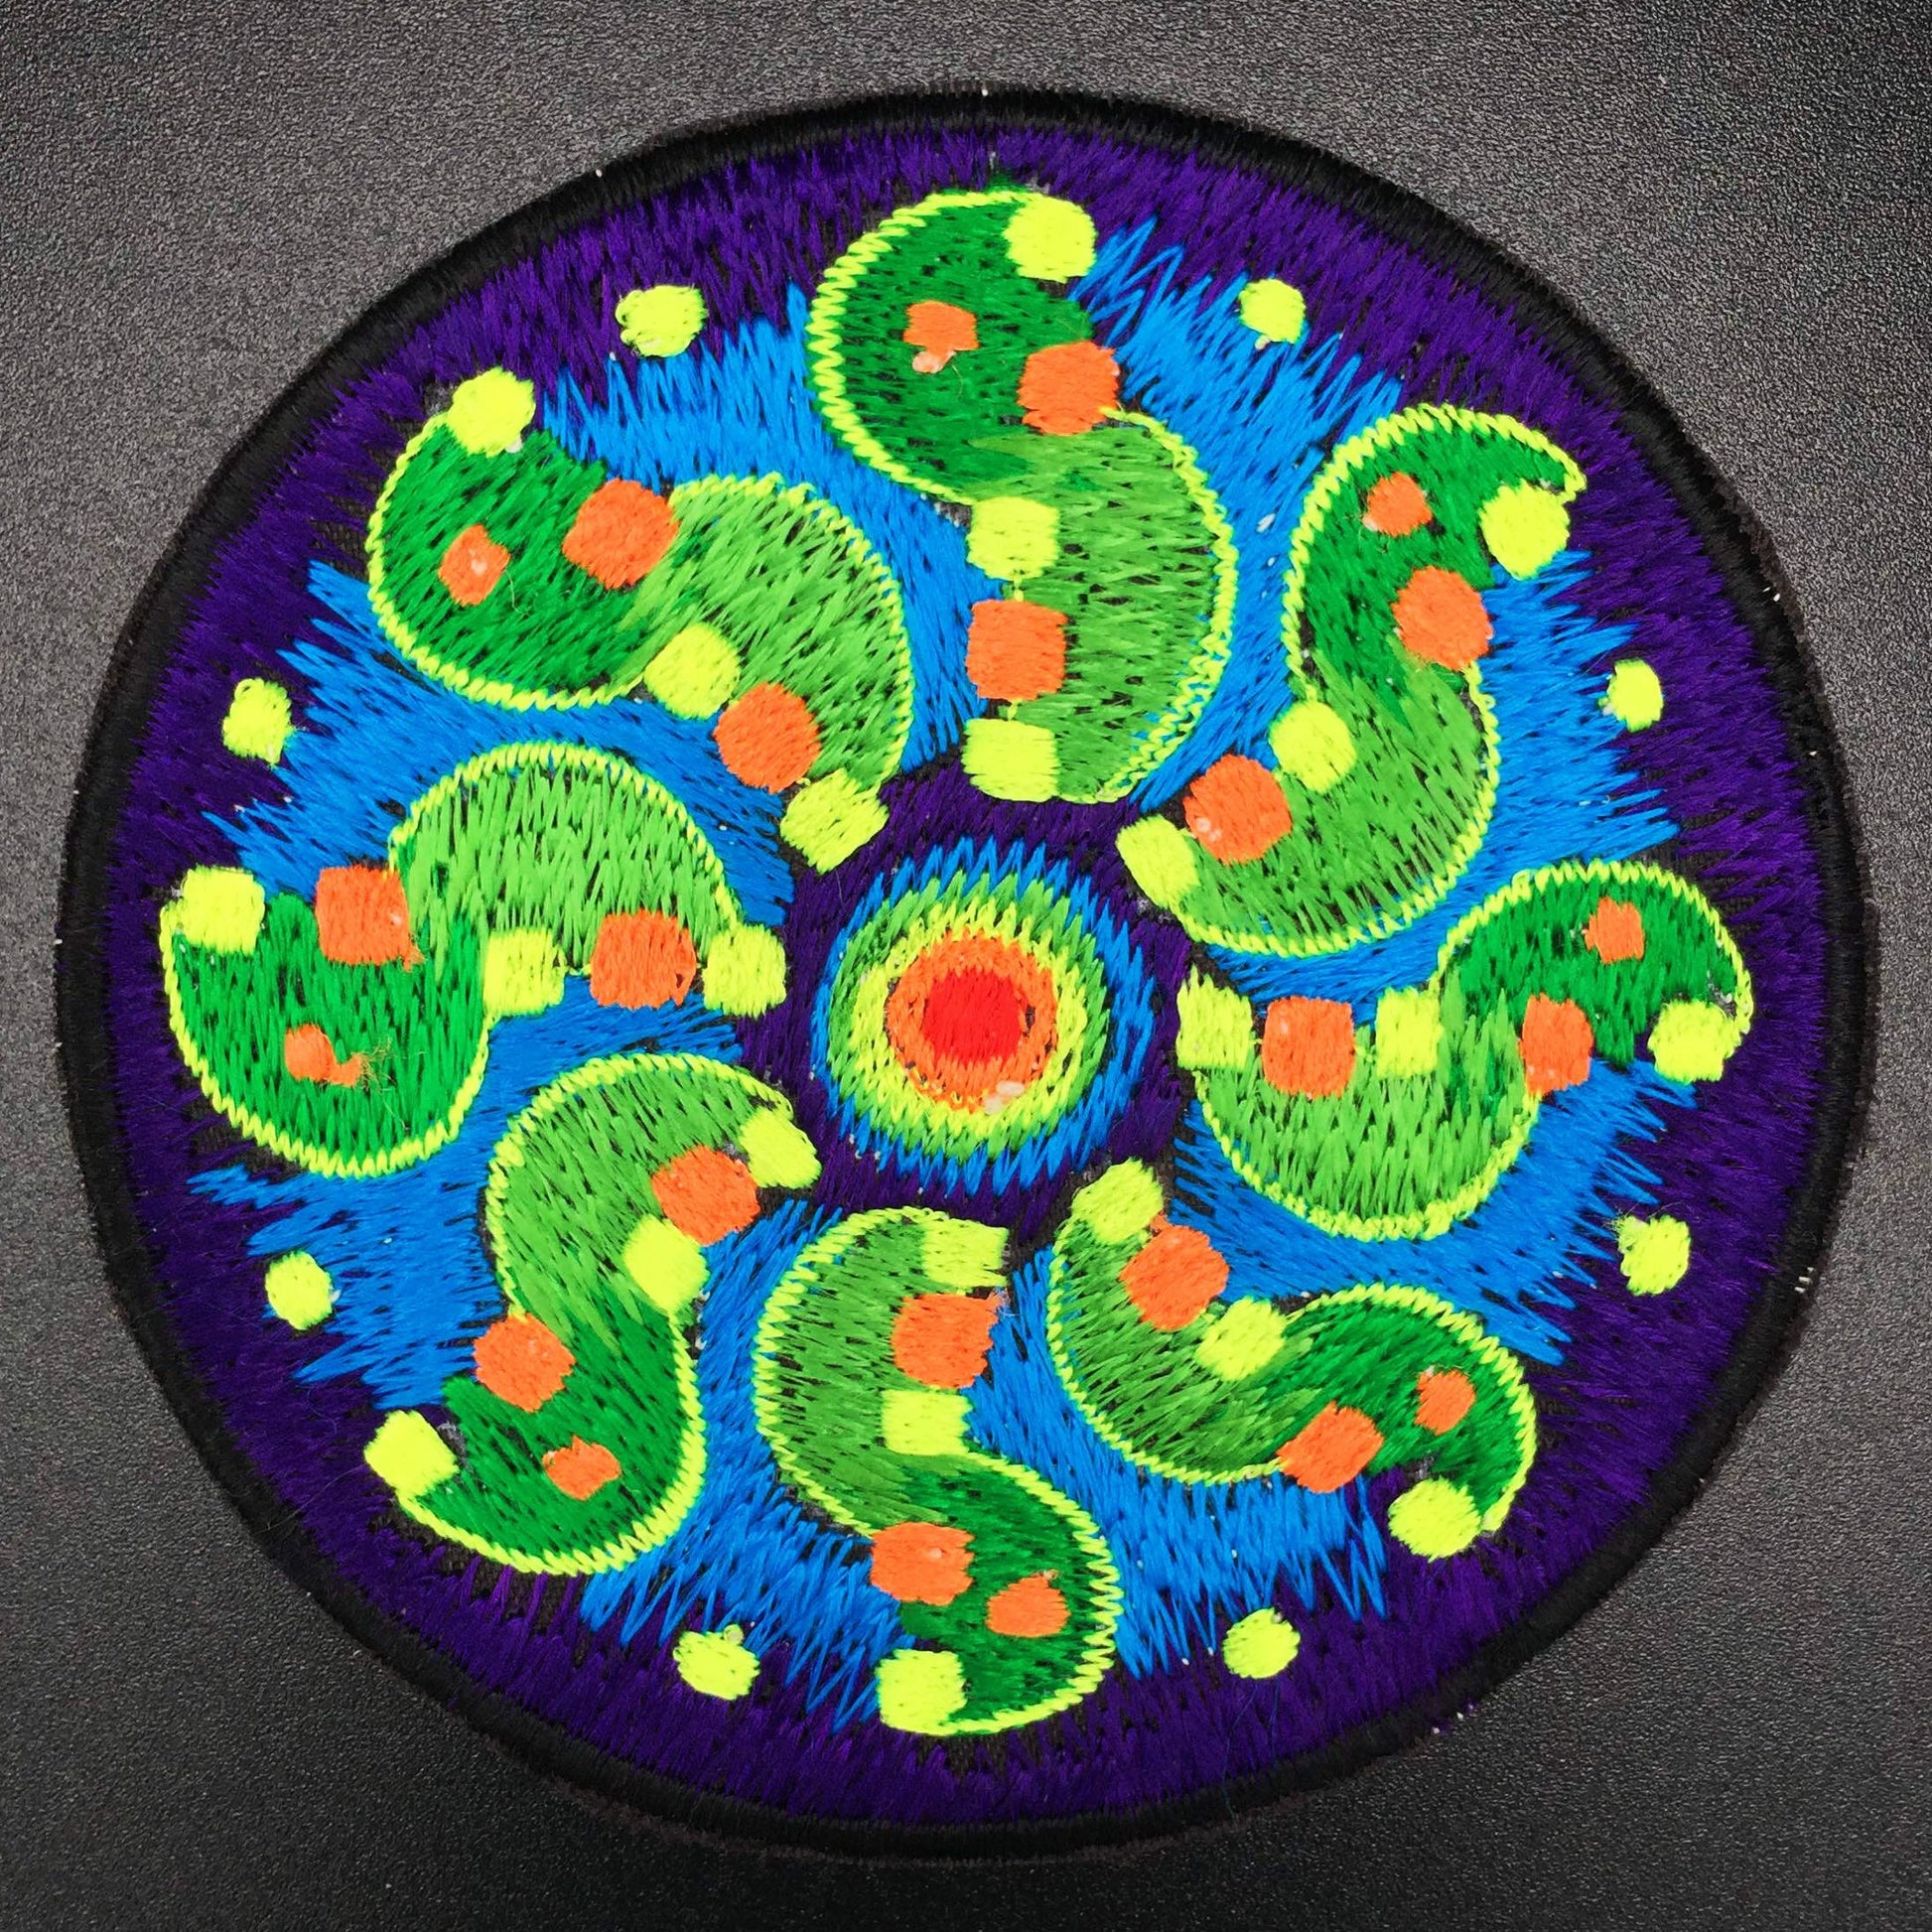 Tidcombe crop circle patch 3.5 inch - handcrafted embroidery alien art - blacklight glowing and for sew on